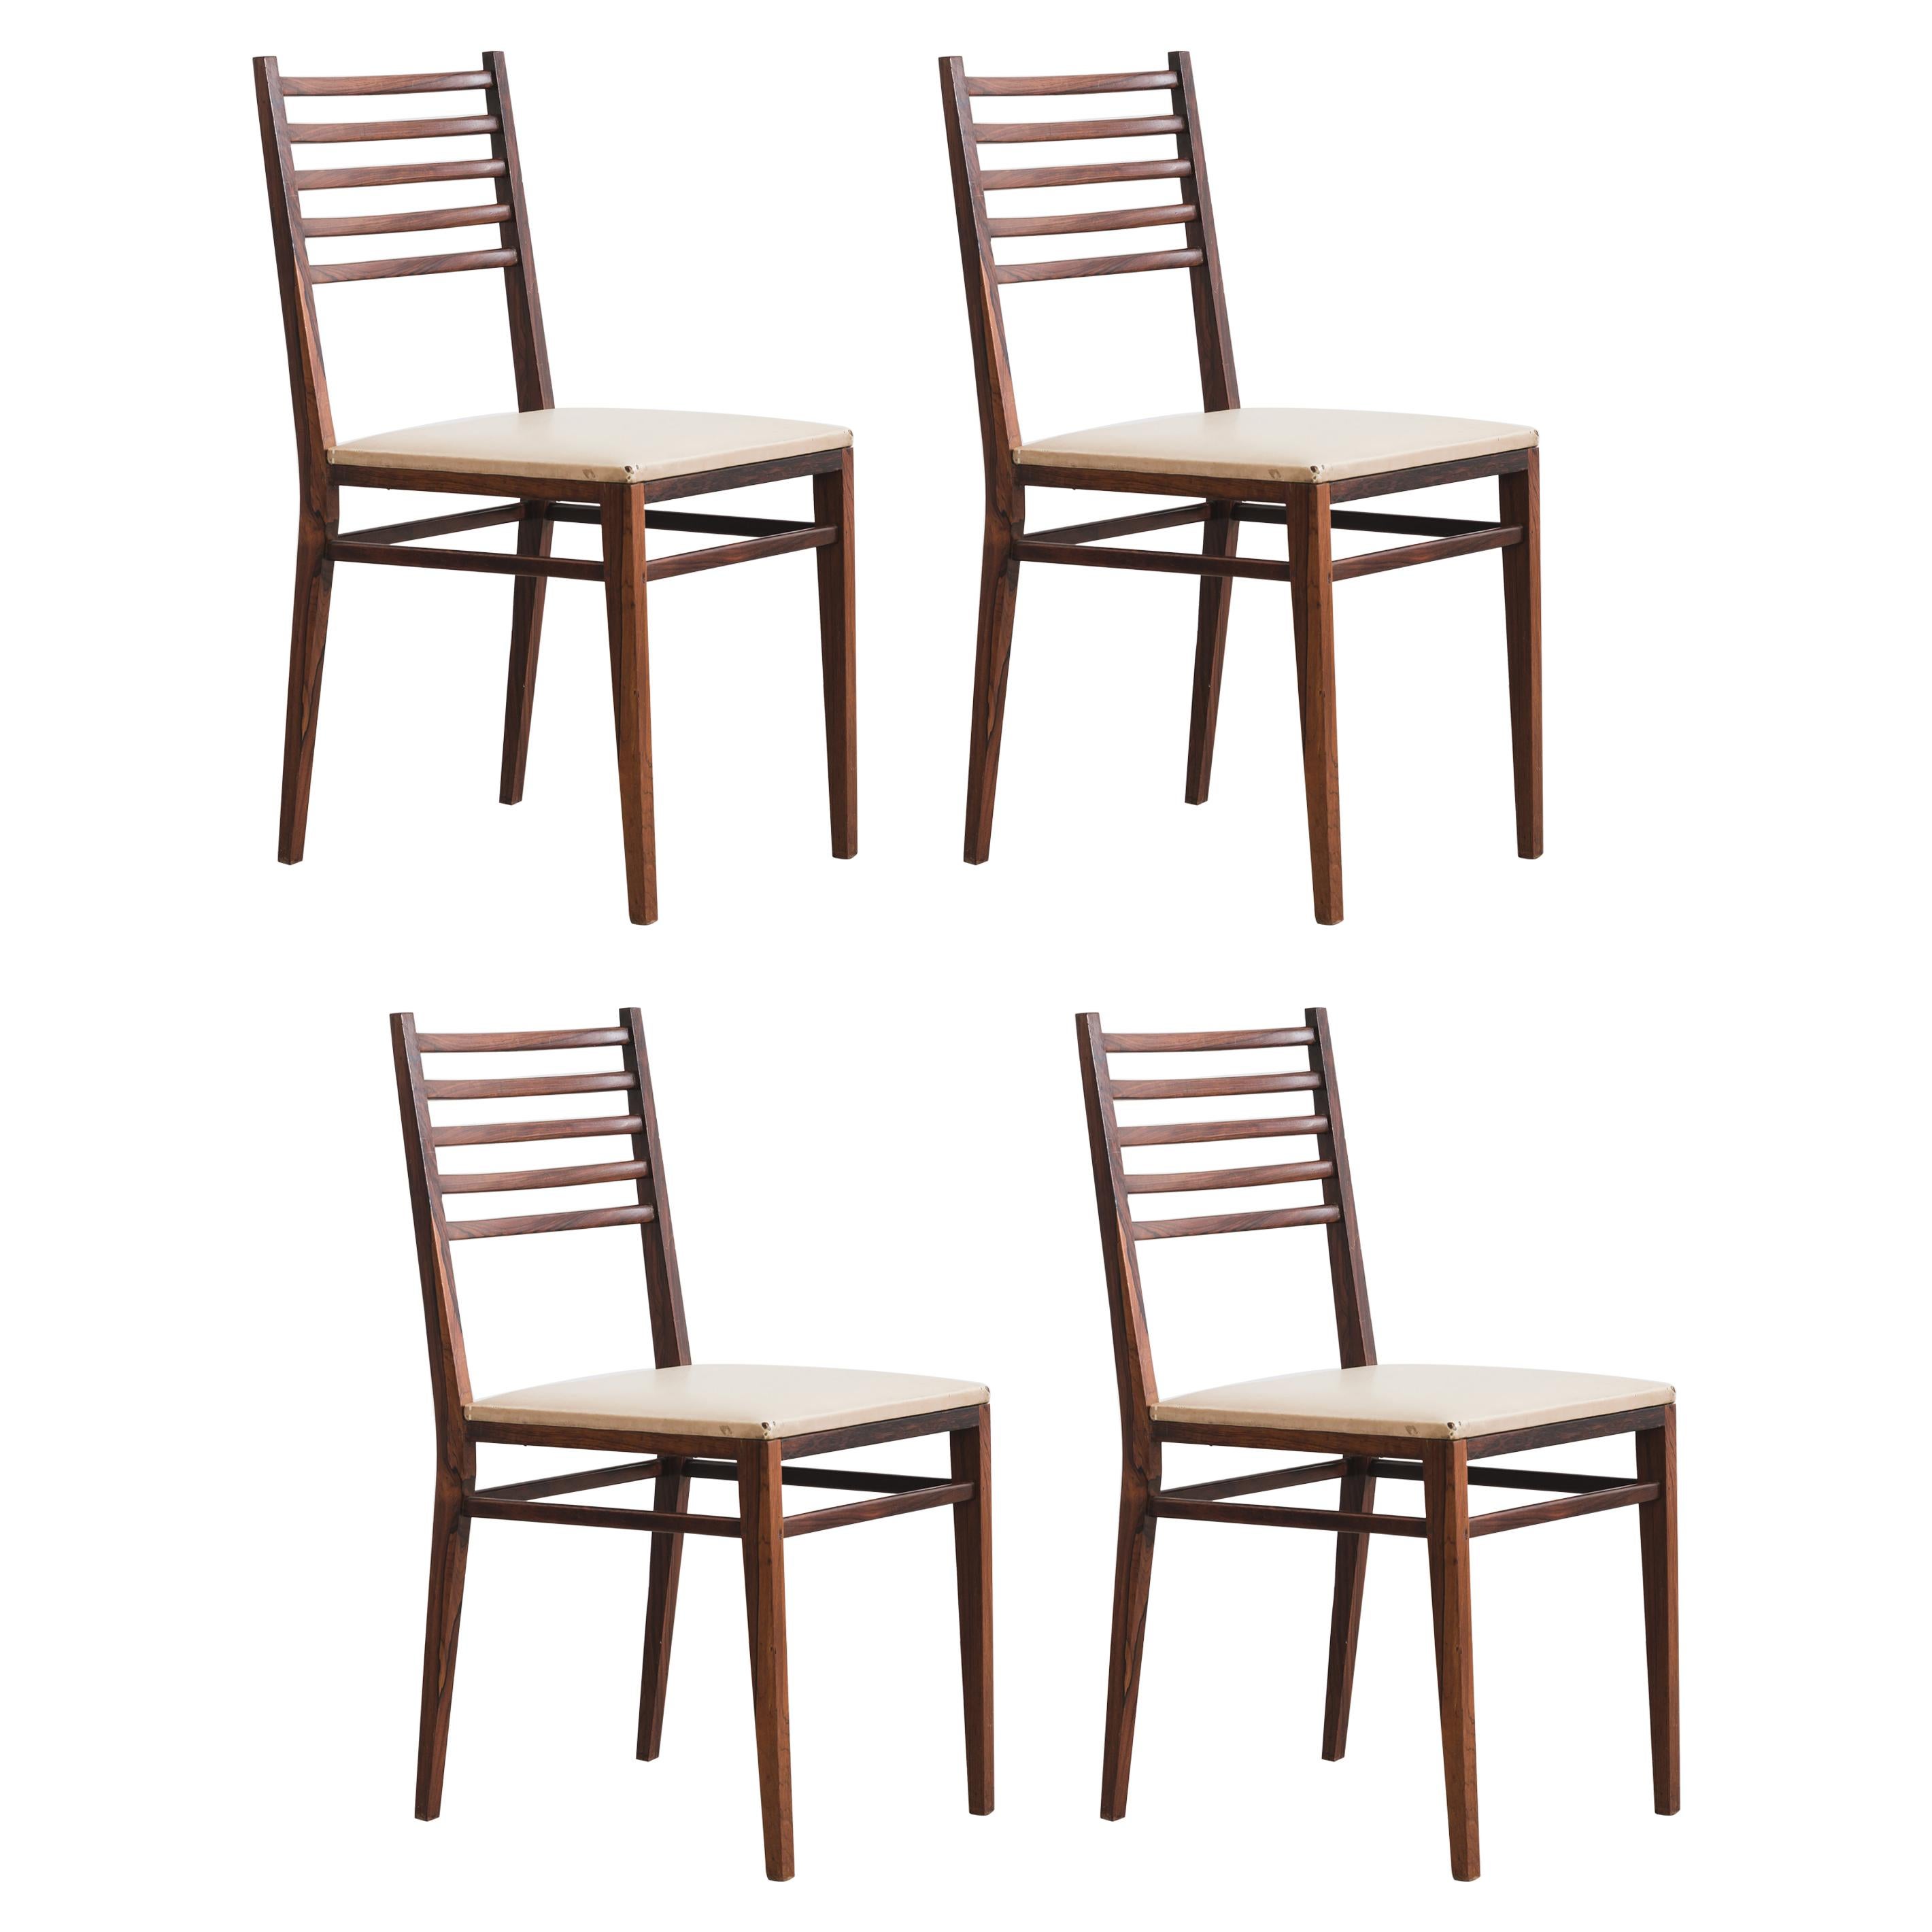 Set of Four Rosewood Chairs Model 4015 by Geraldo de Barros, Unilabor, 1960 For Sale